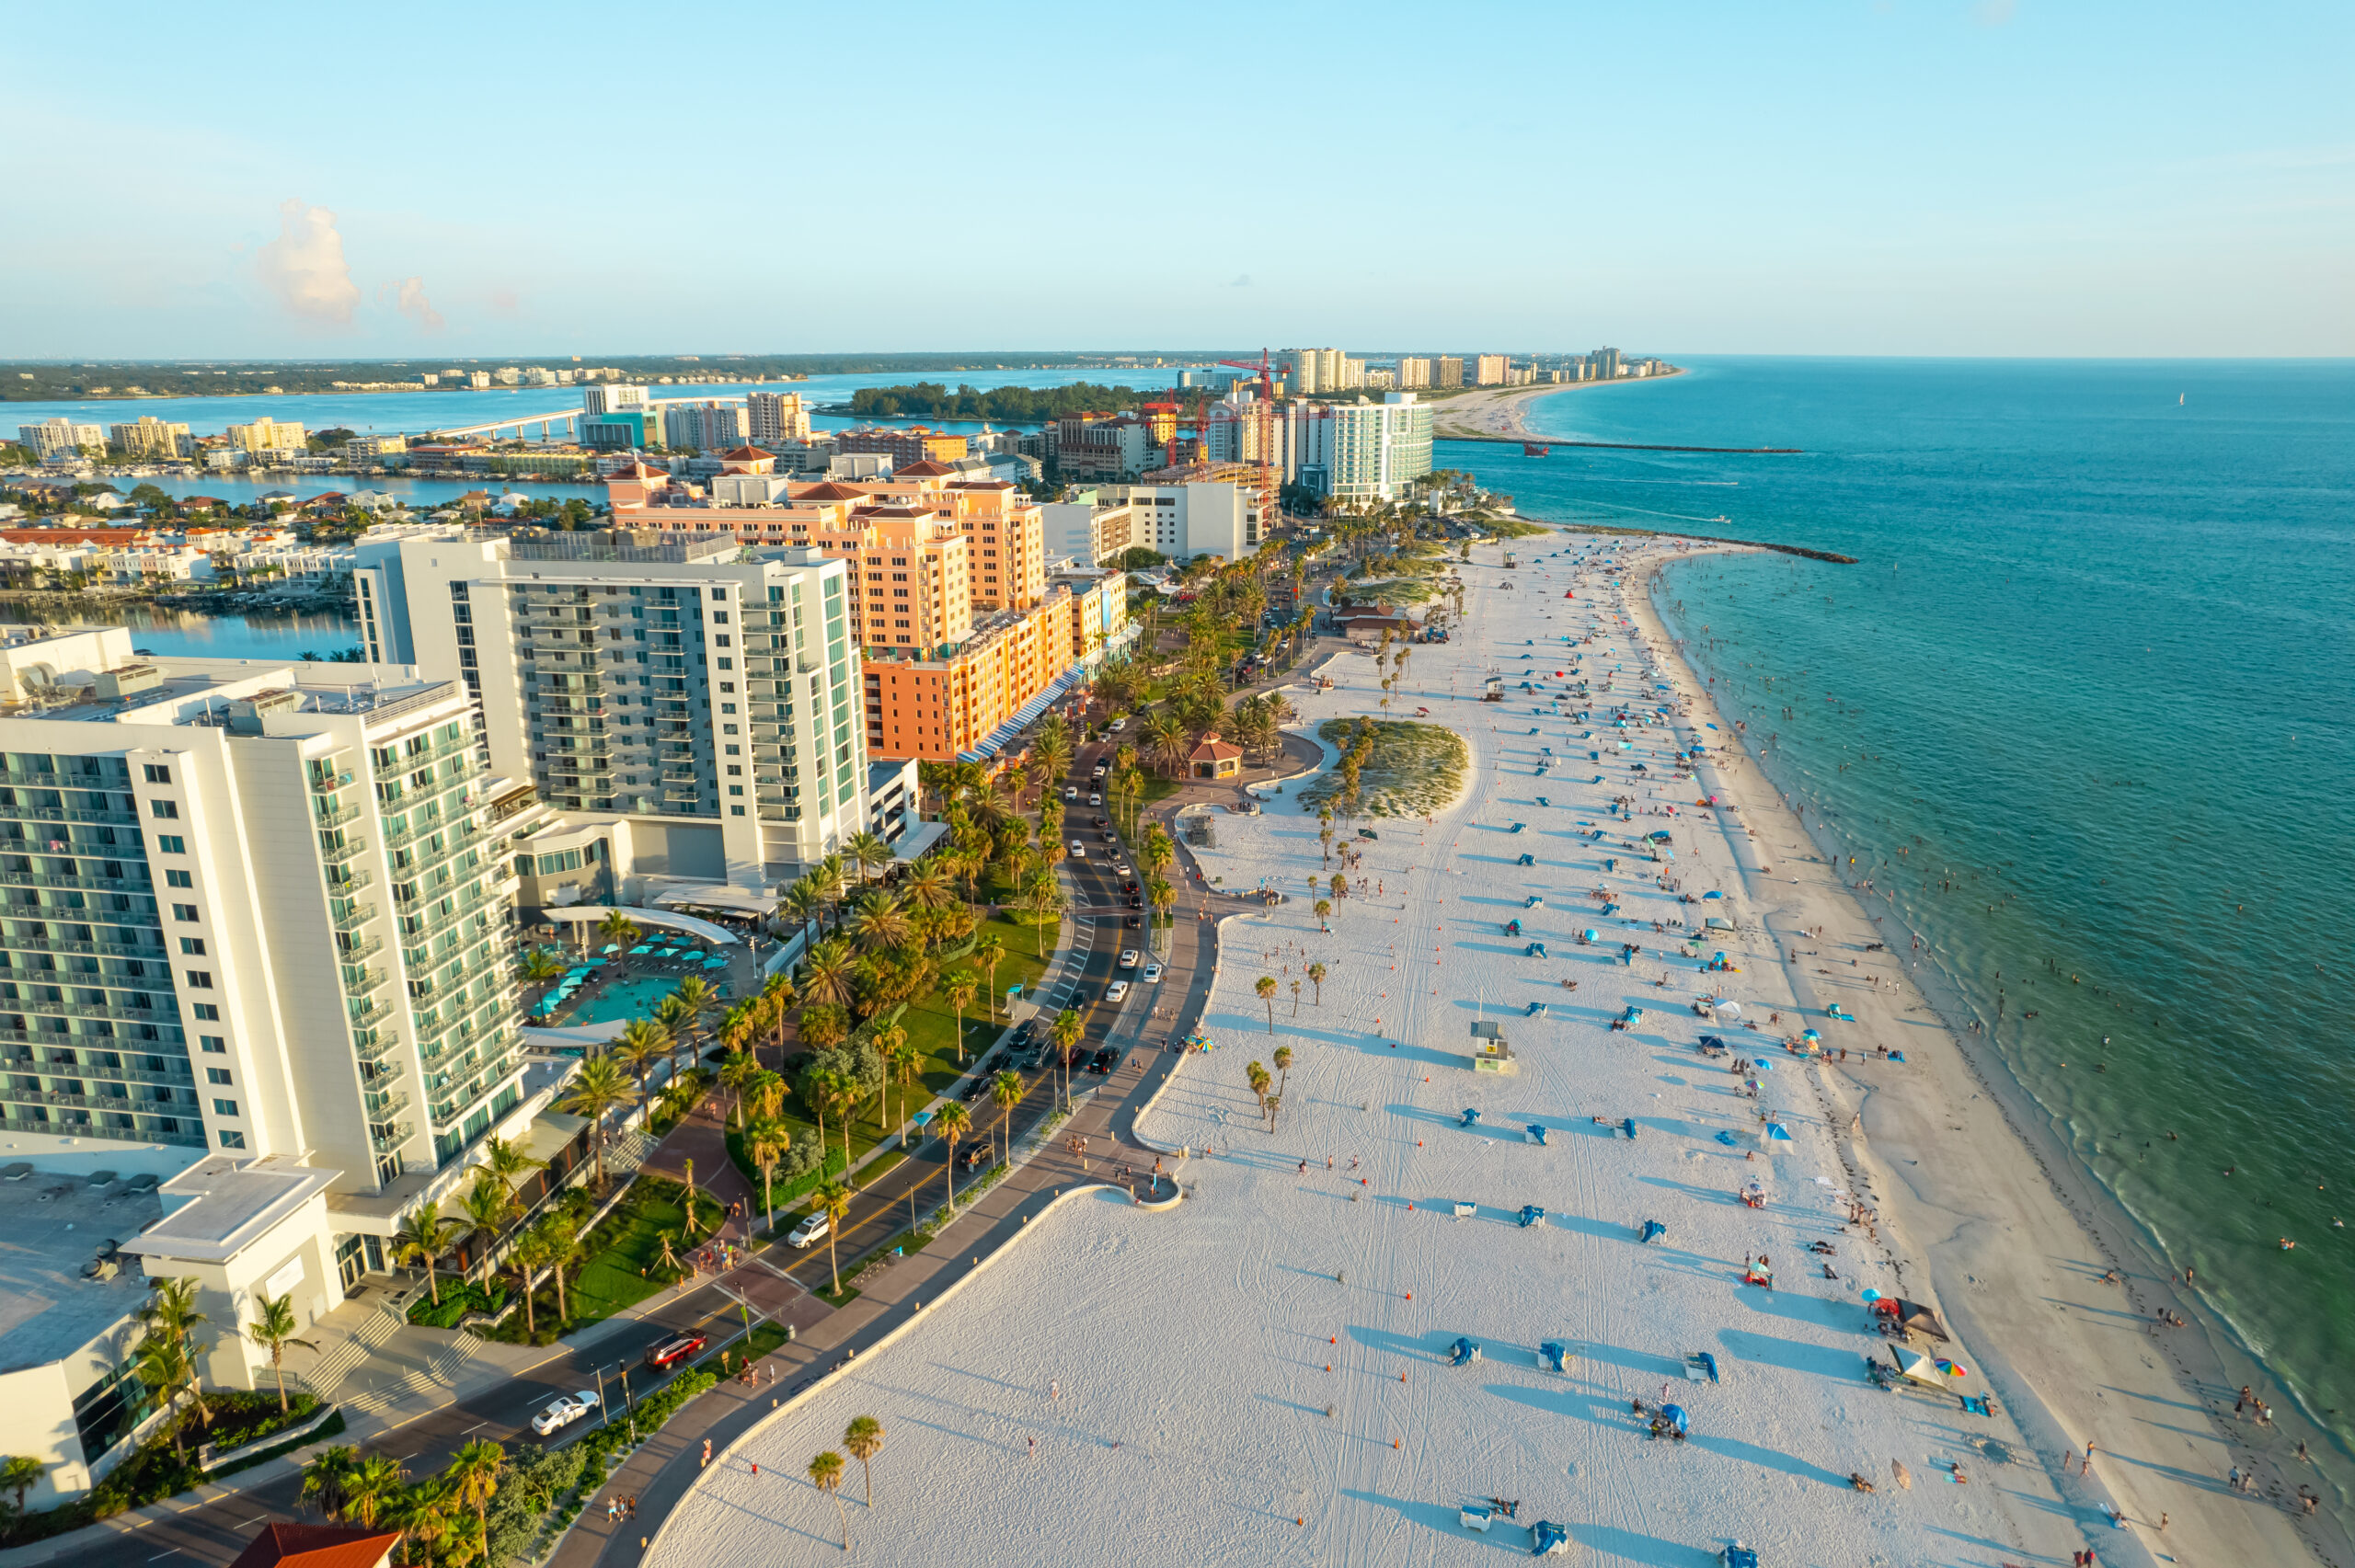 The Most Romantic Beachfront Hotels in Florida